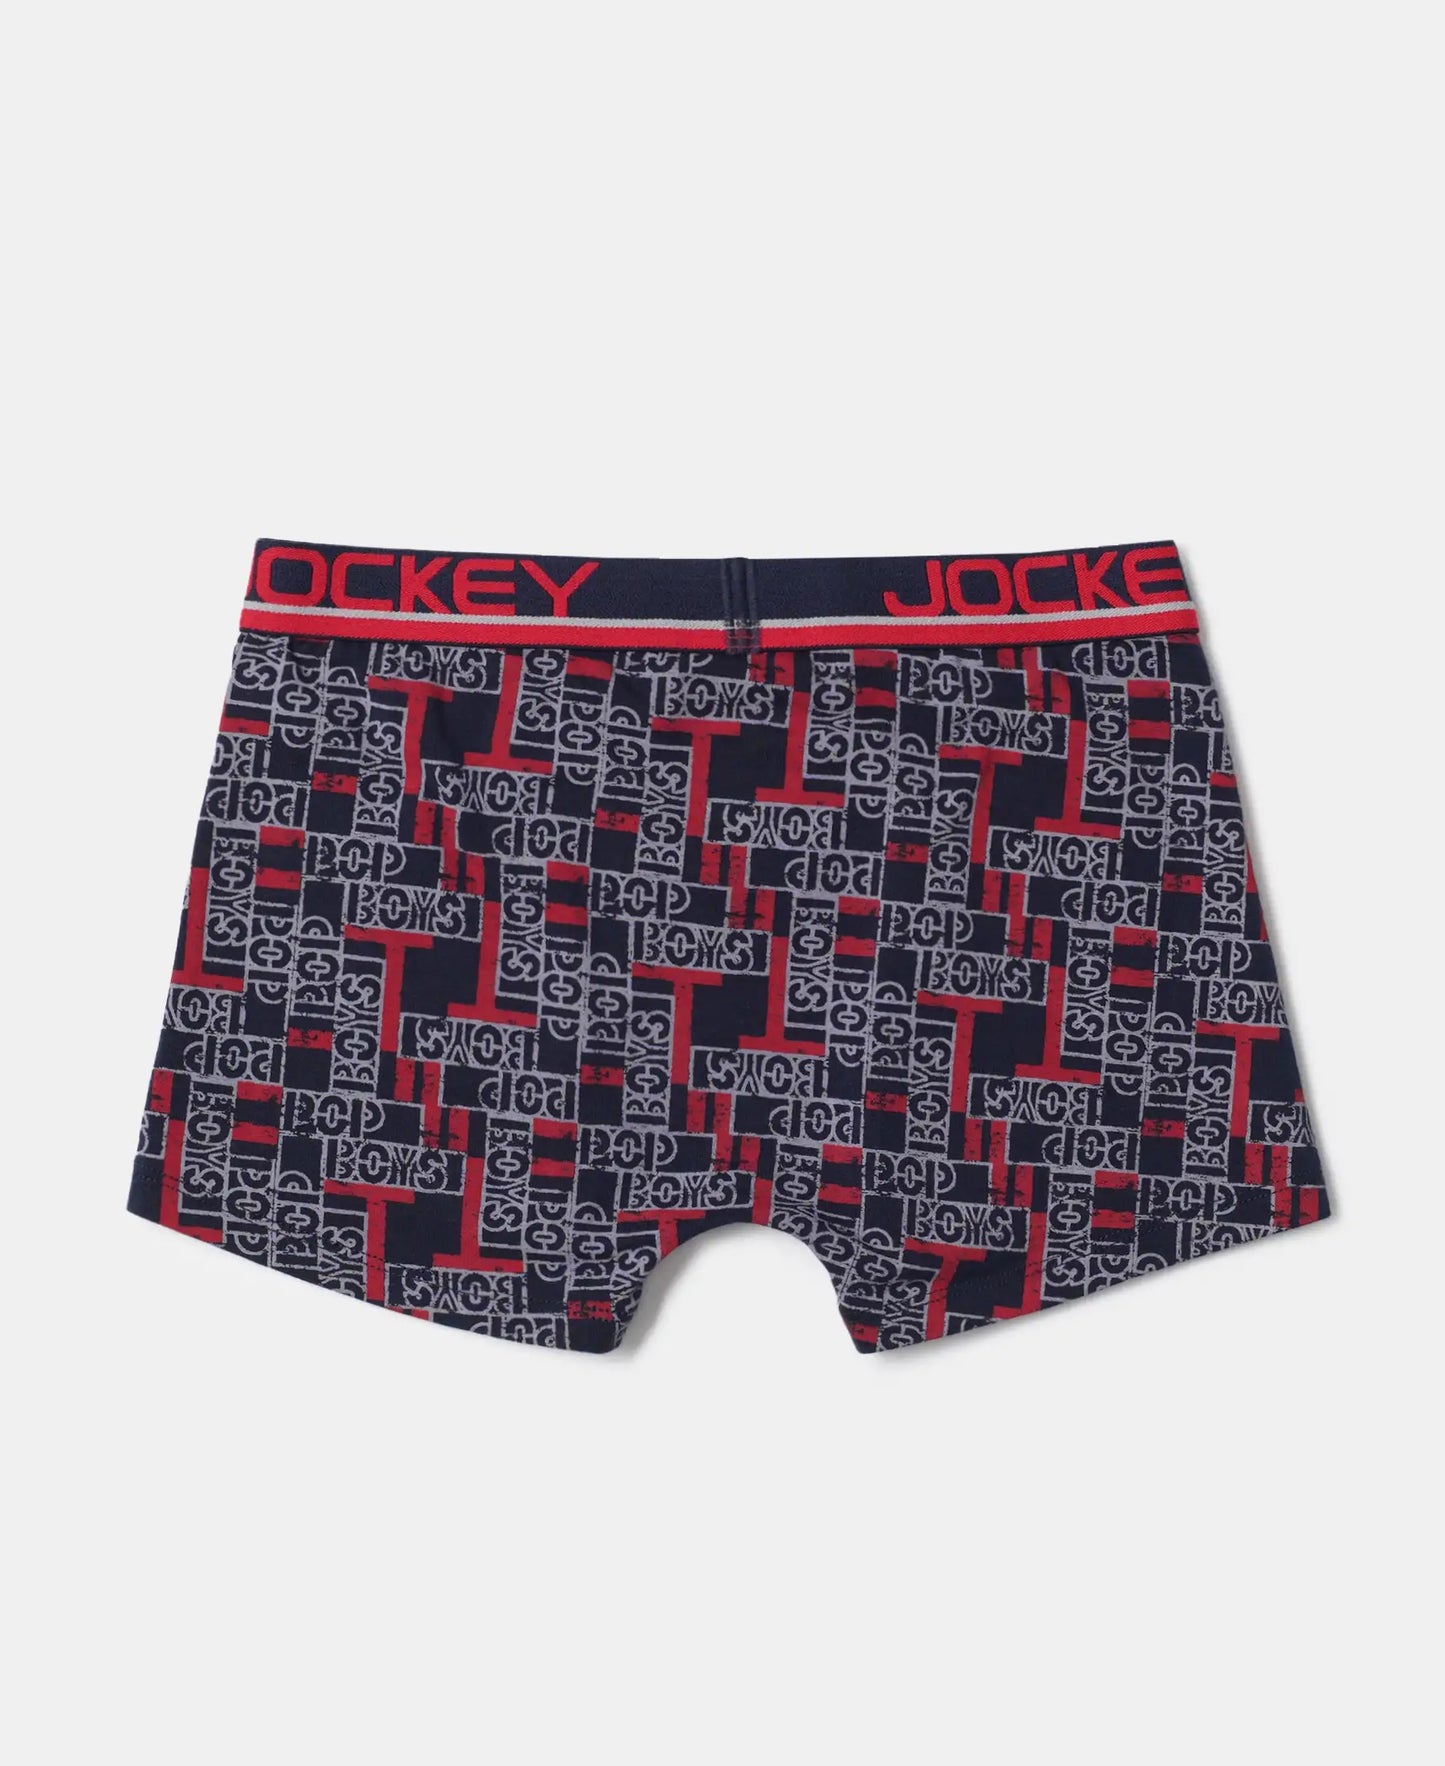 Super Combed Cotton Elastane Printed Trunk with Ultrasoft Waistband - Assorted Prints-4